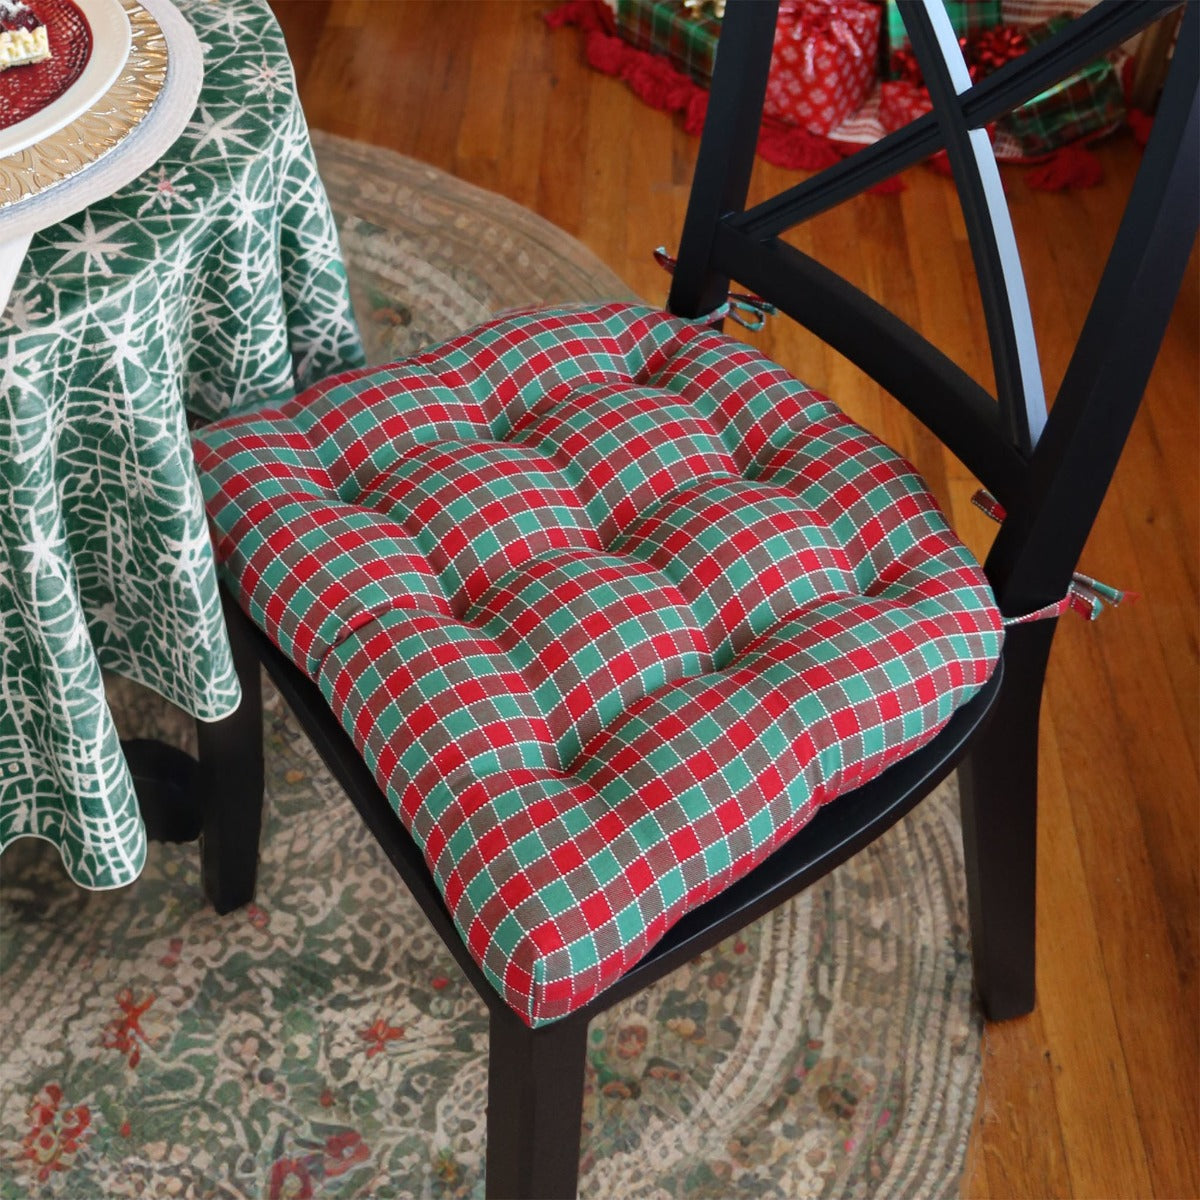 red and green plaid dining chair cushions in dining room decorated for christmas as seen in vermont country store